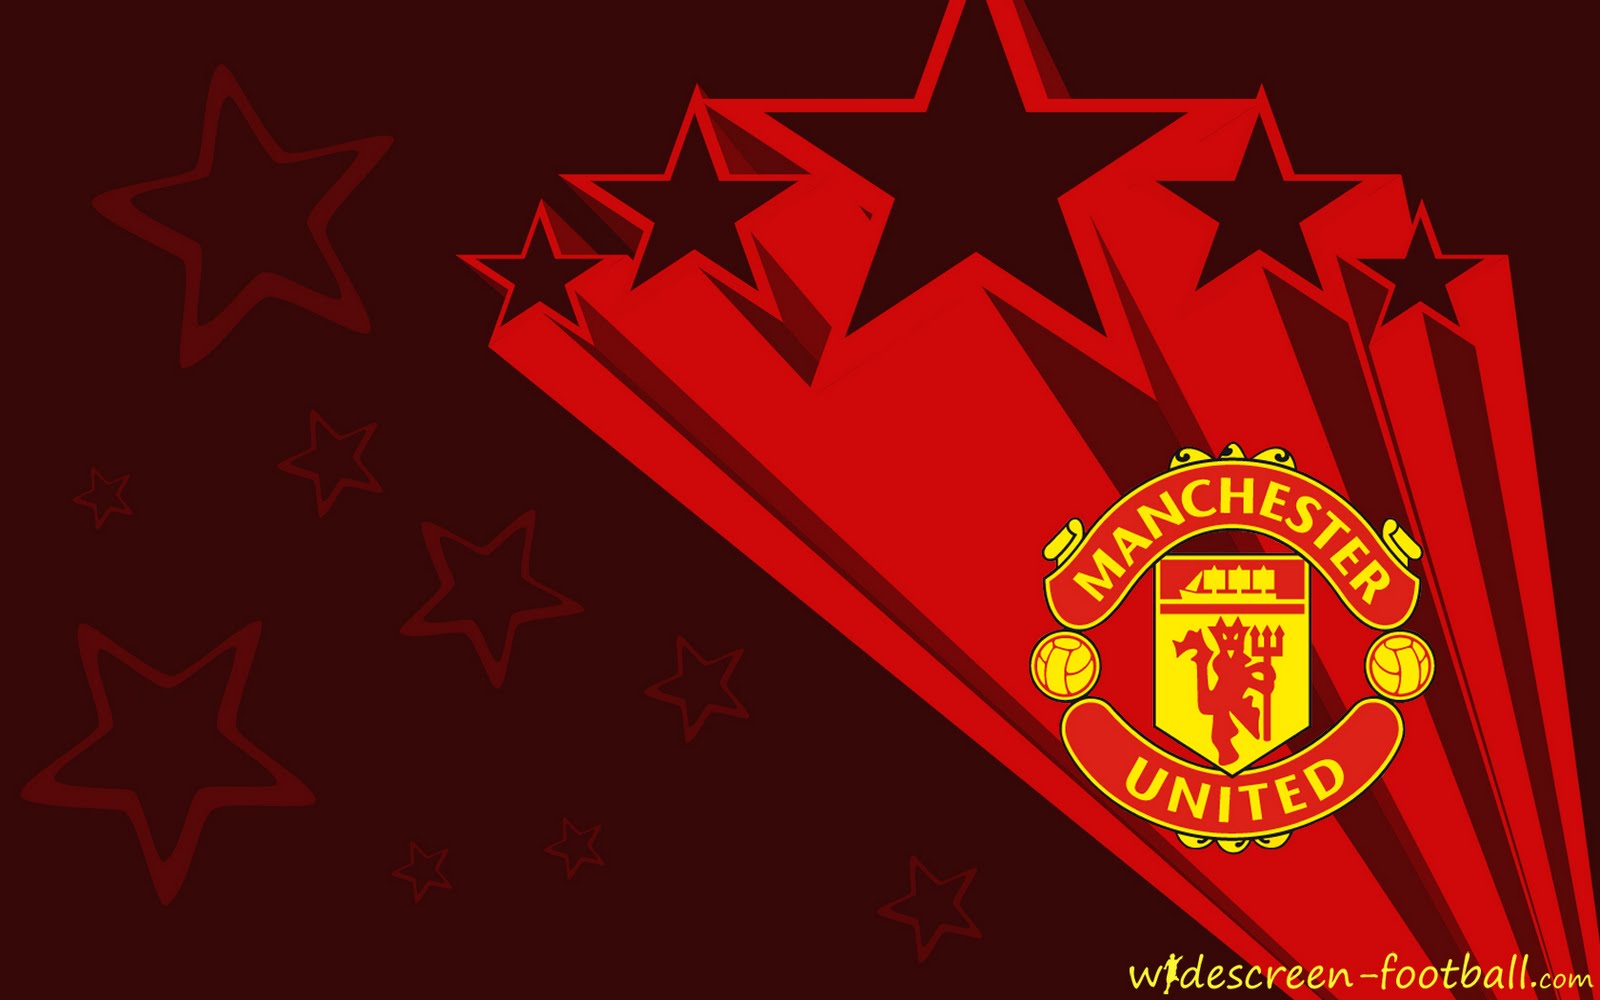 Manchester United Wallpapers HDwallpapers screensavers